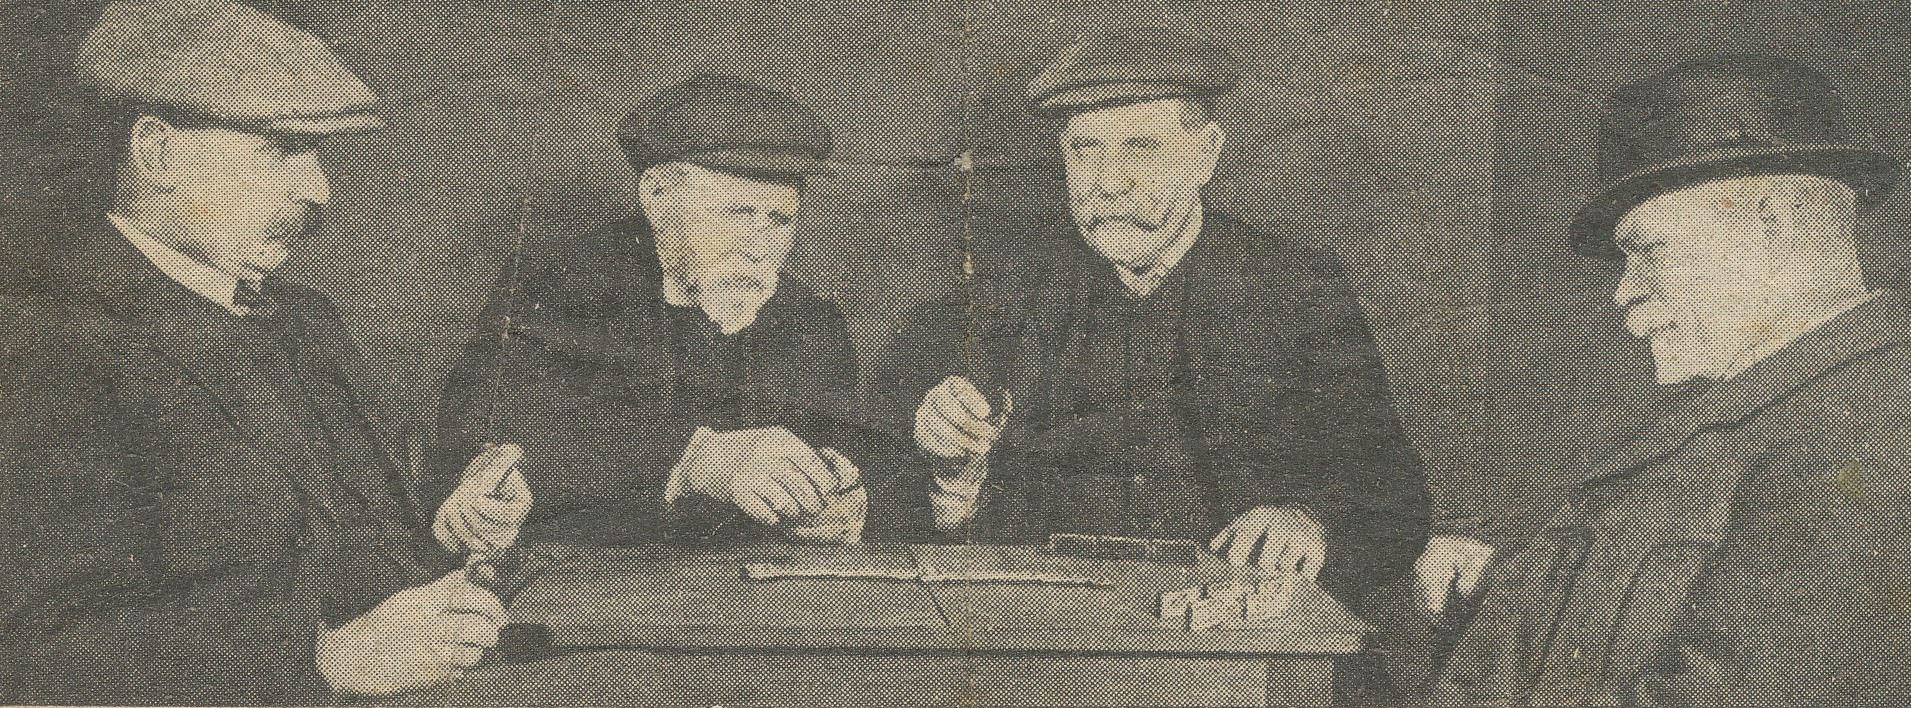 Four Dingwall gents pictured early last century pitting their wits against each other in a dominoes match. They were all well-kent faces in the community. From left to right: Mr D M Watt, editor Ross-shire Journal, Mr Roderick Mackenzie, plumber, Sergt-major Heffernan and Mr John Munro, photographer..